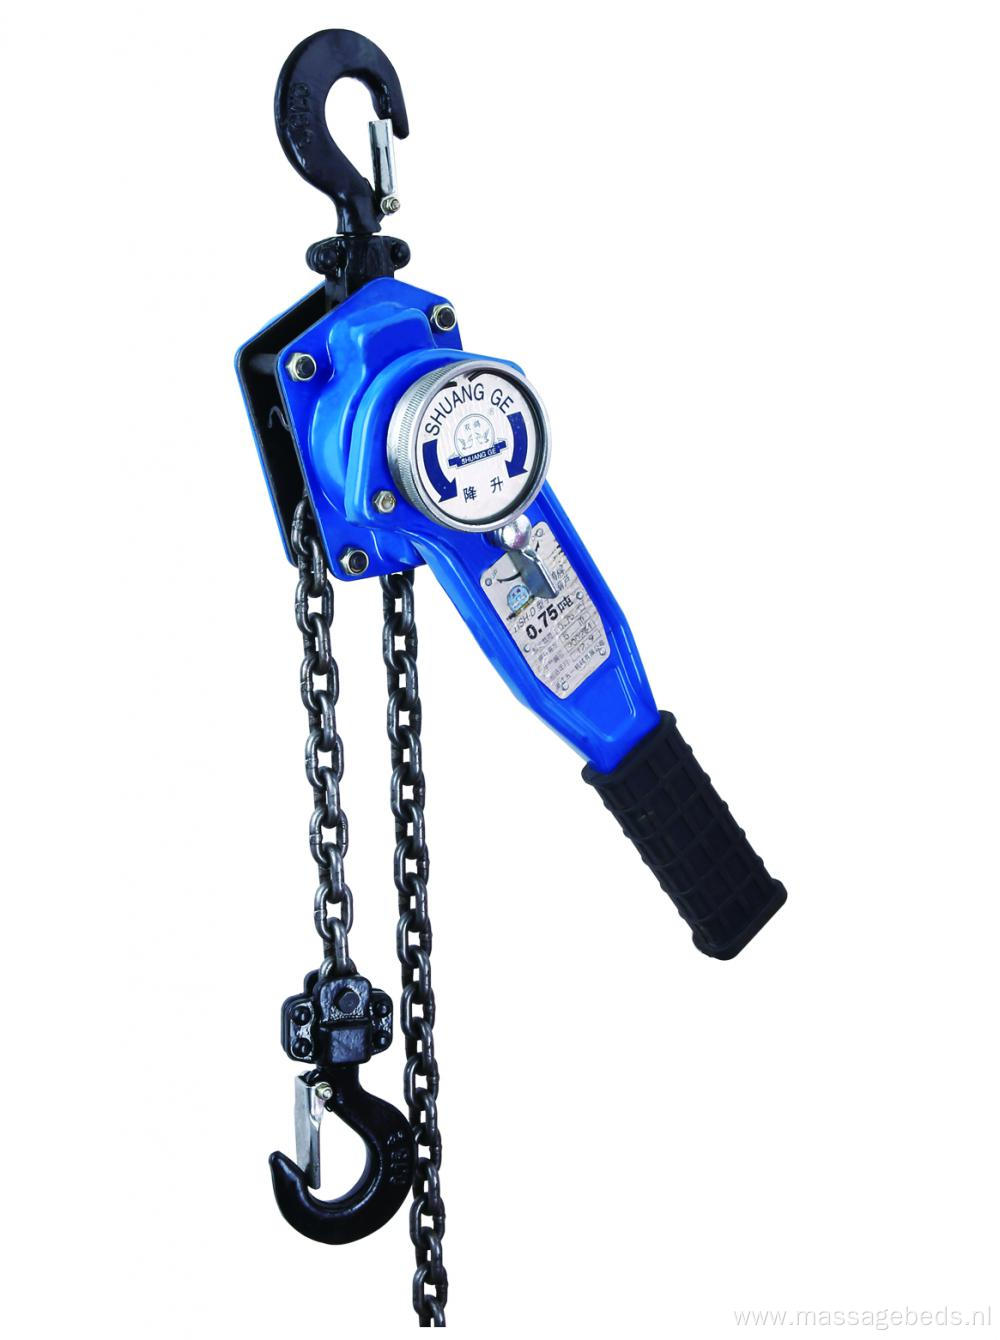 HSHD LEVER HOIST WITH G80 CHAIN BLOCK AND G80 LINK CHAIN